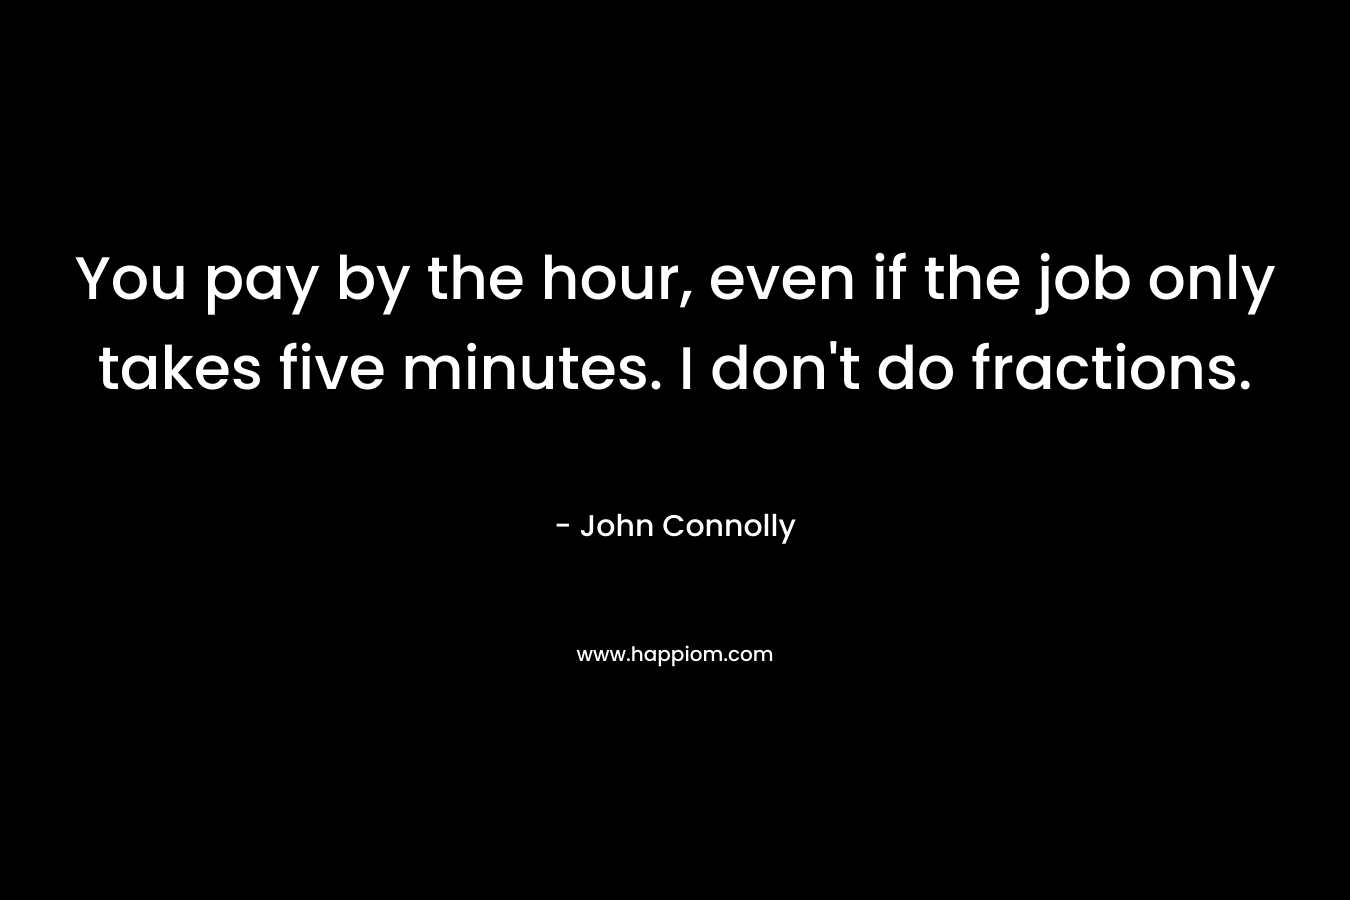 You pay by the hour, even if the job only takes five minutes. I don’t do fractions. – John Connolly